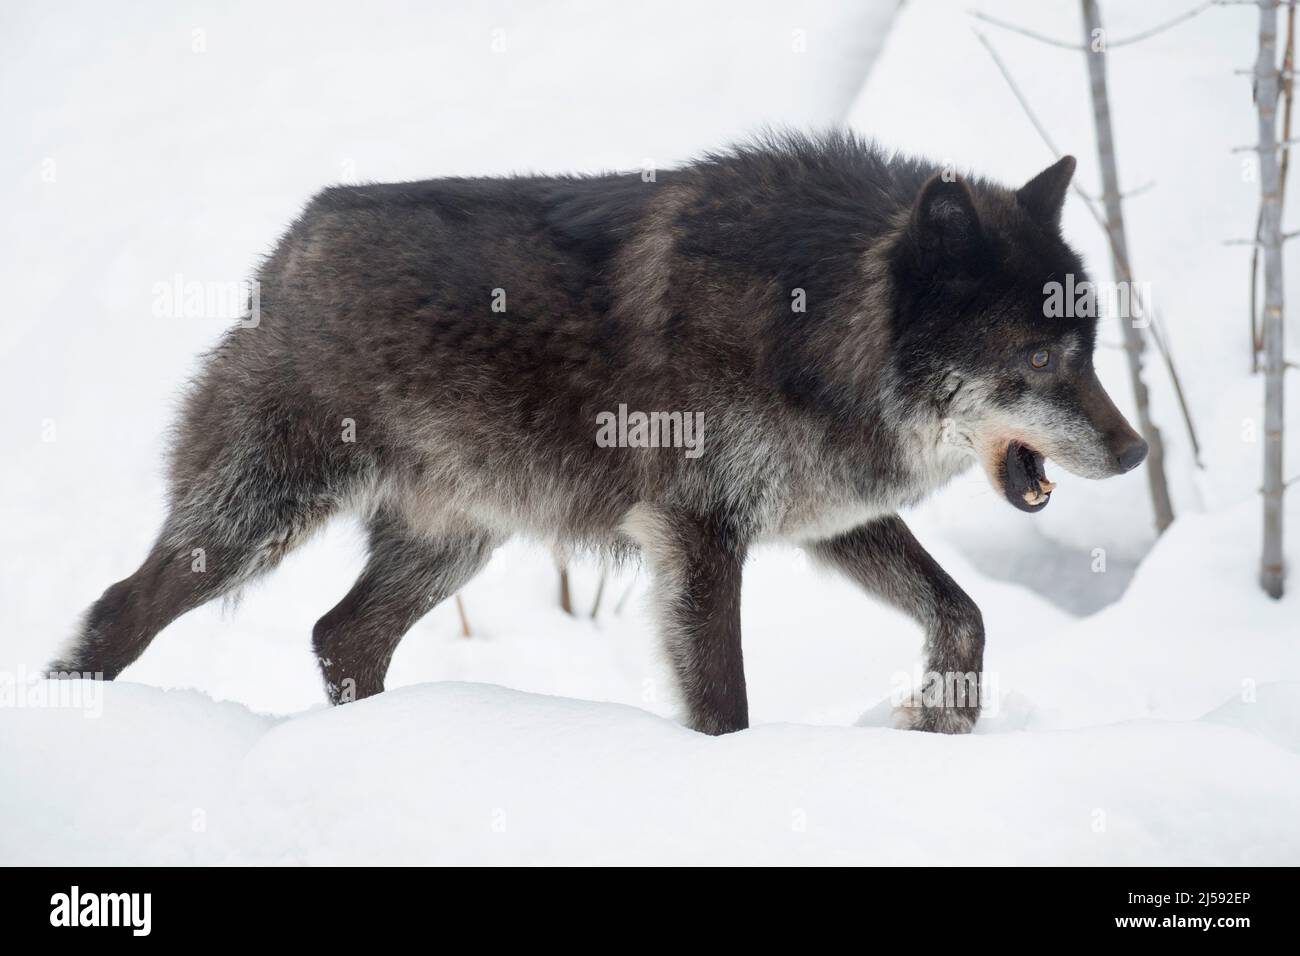 Wild black canadian wolf is walking on a white snow. Canis lupus pambasileus. Animals in wildlife. Stock Photo